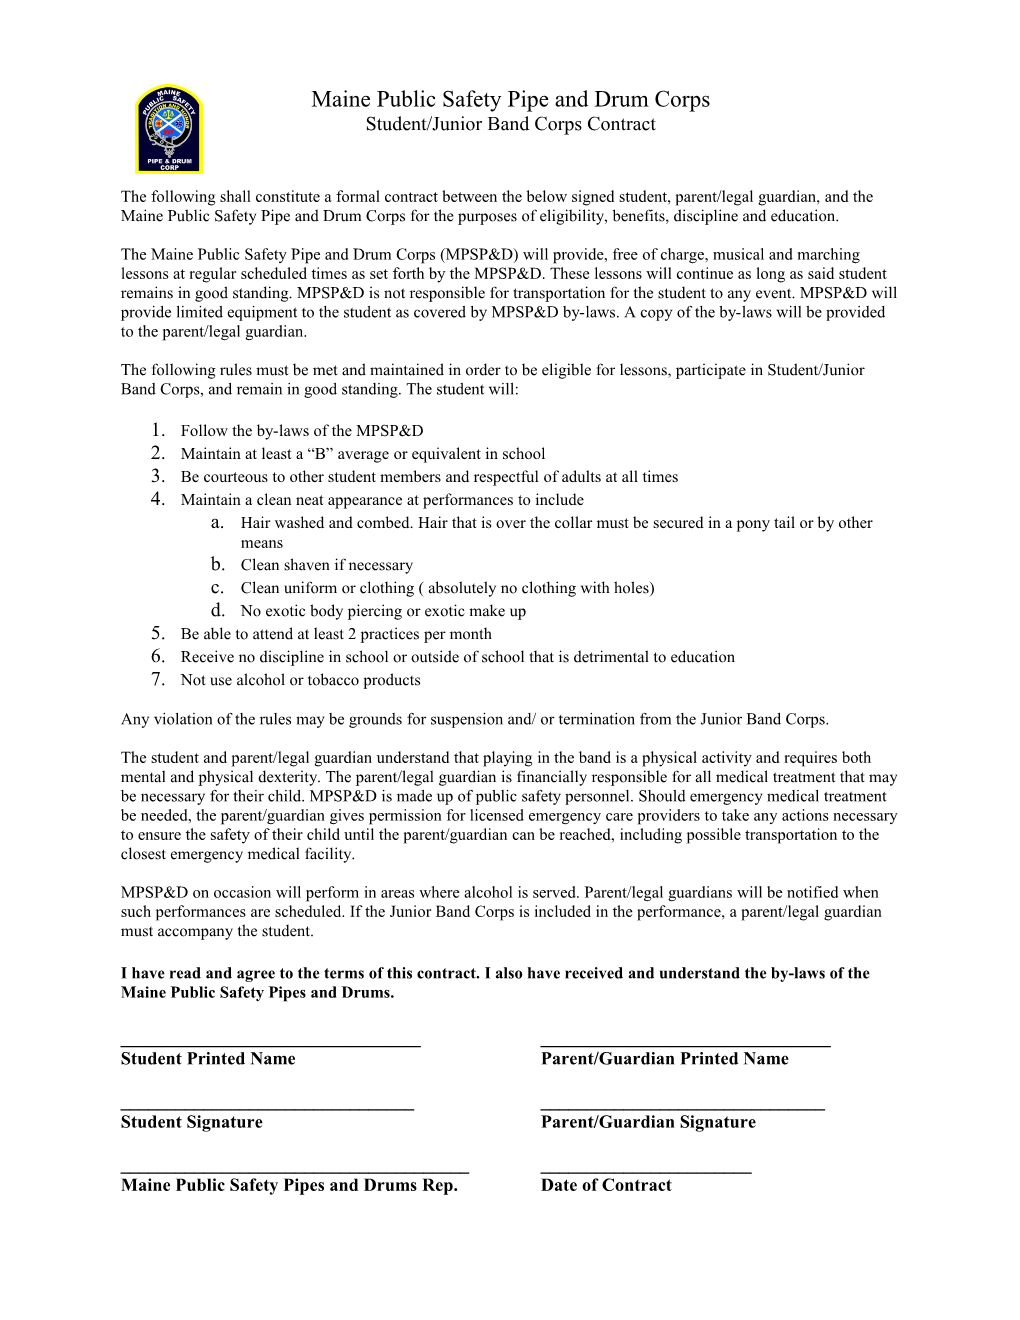 Student/Junior Band Corps Contract